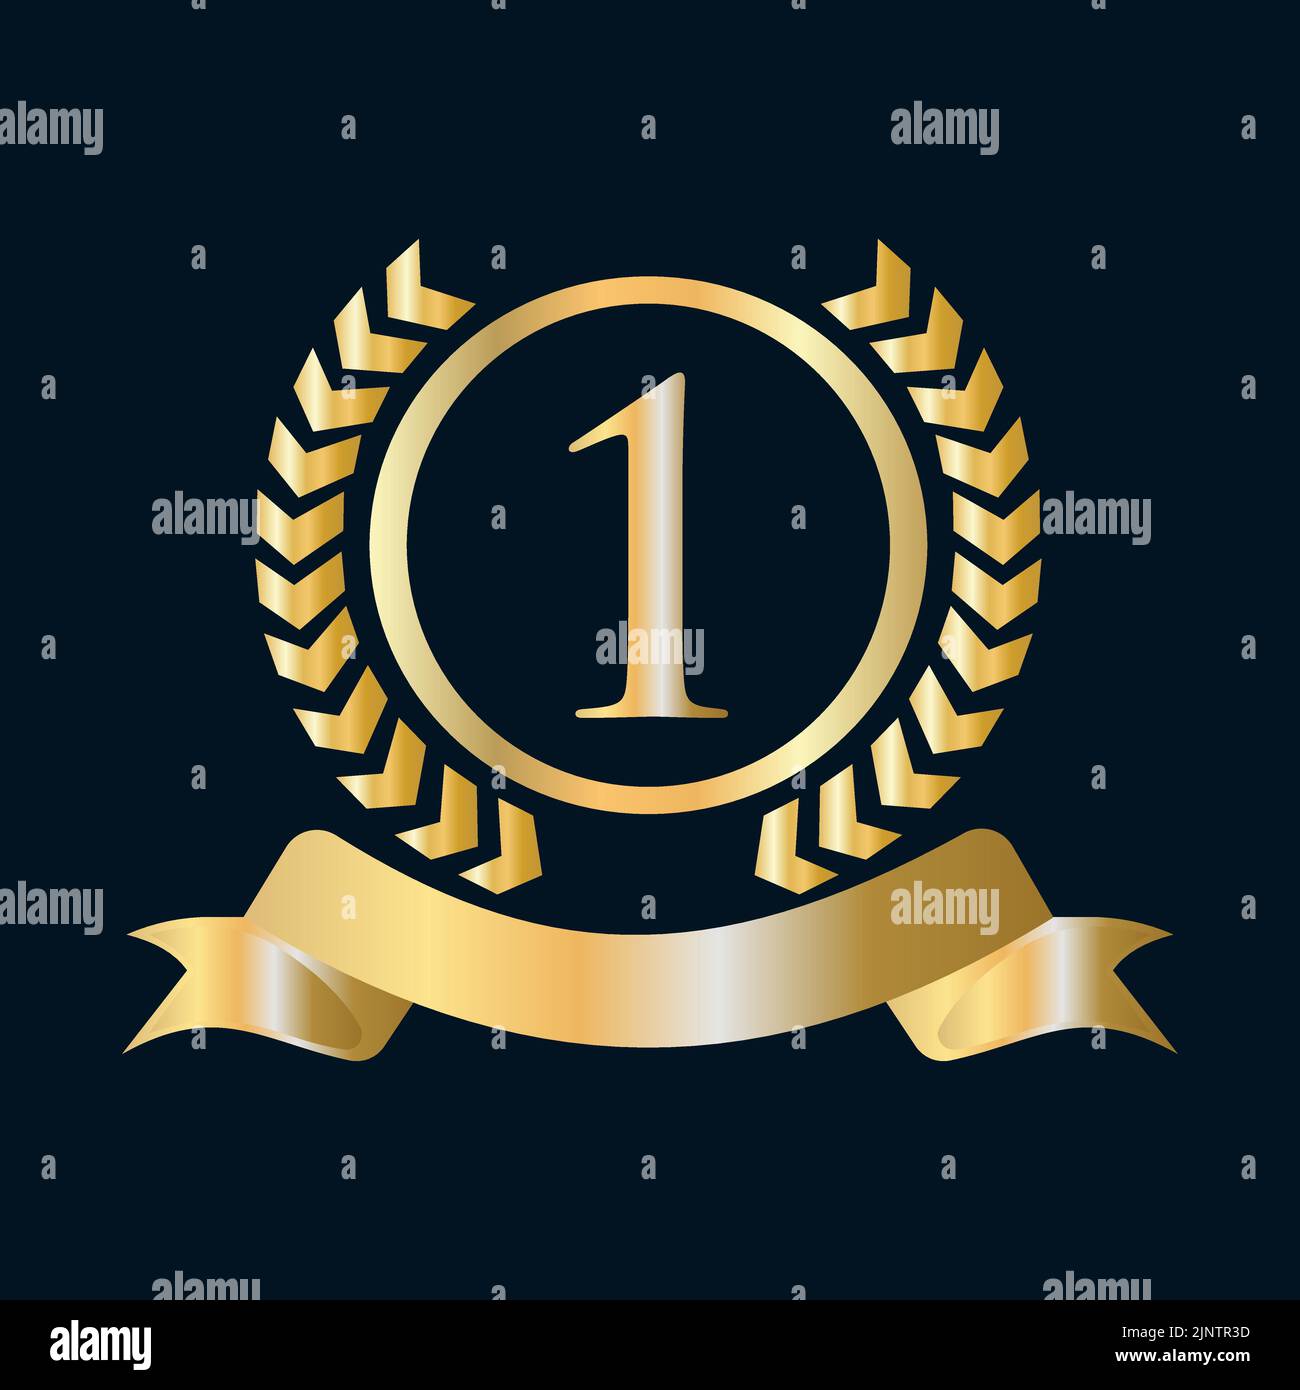 Also celebrating their first wedding anniversary Stock Vector ...